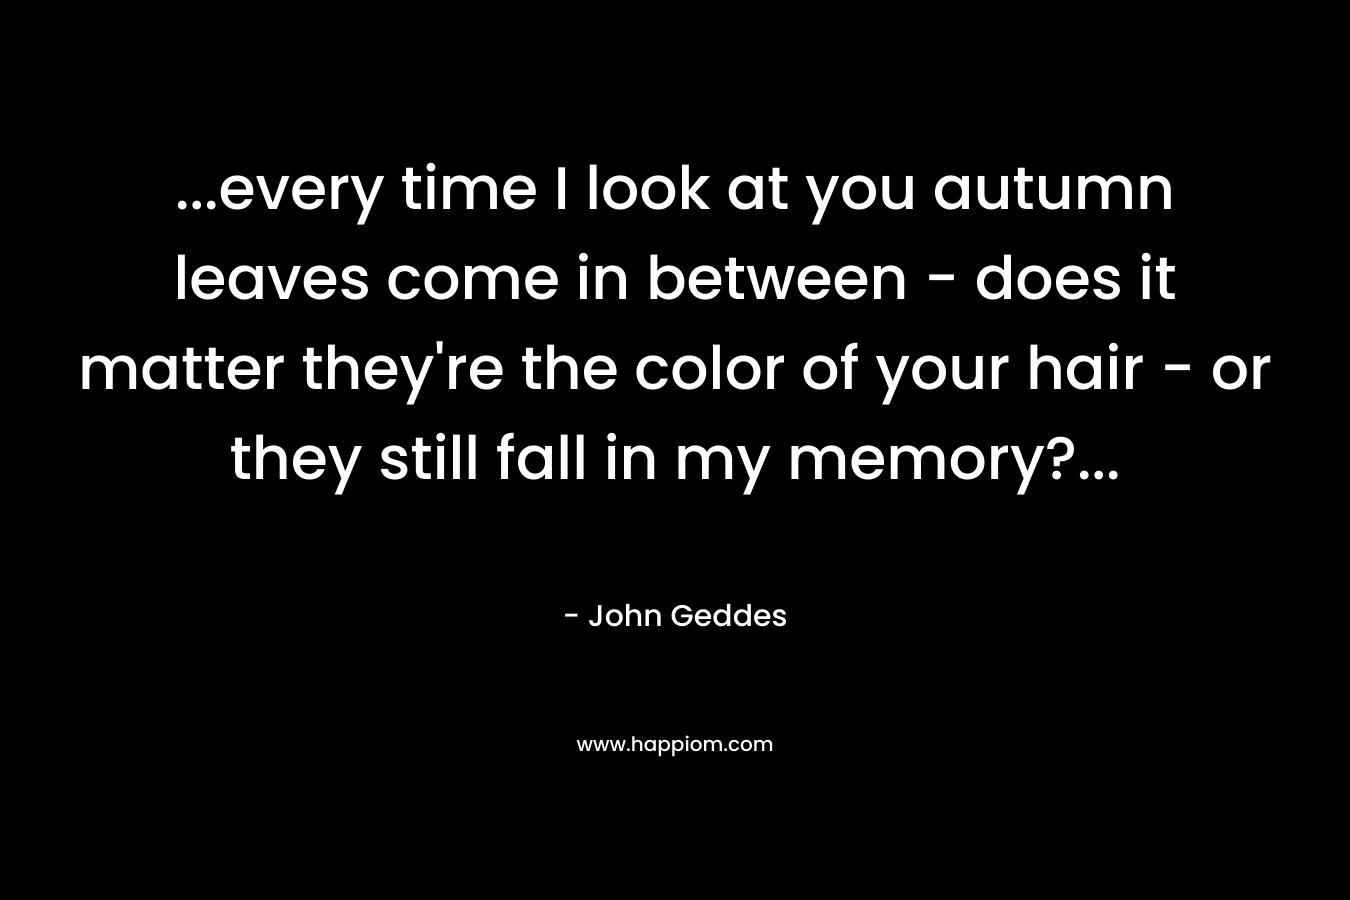 …every time I look at you autumn leaves come in between – does it matter they’re the color of your hair – or they still fall in my memory?… – John Geddes